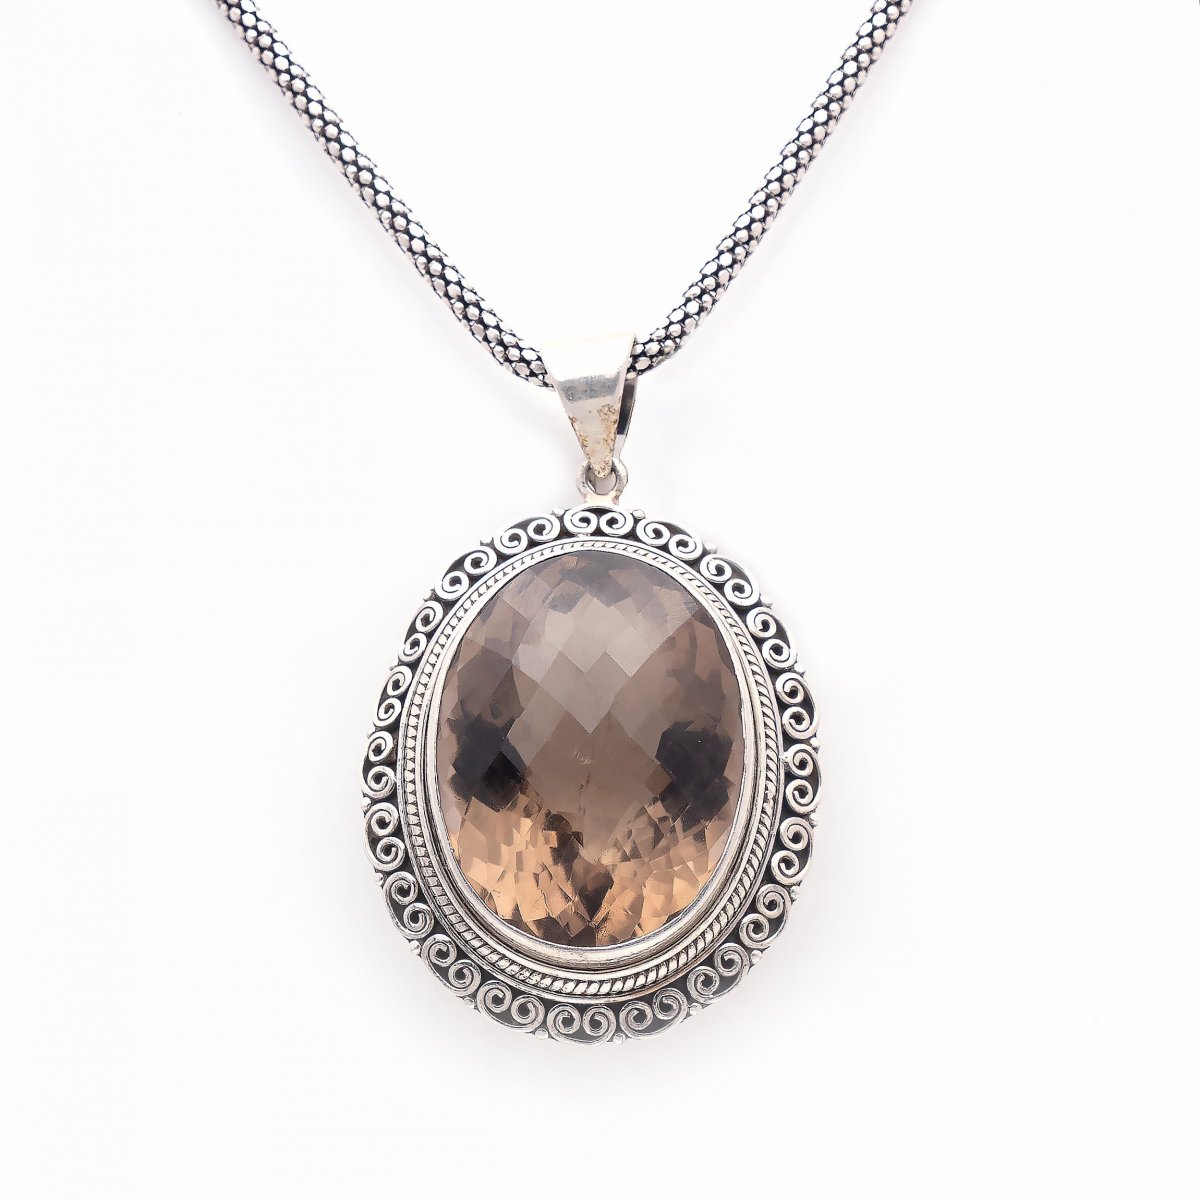 92.5 OXIDIZED SILVER PENDENT FOR LADIES